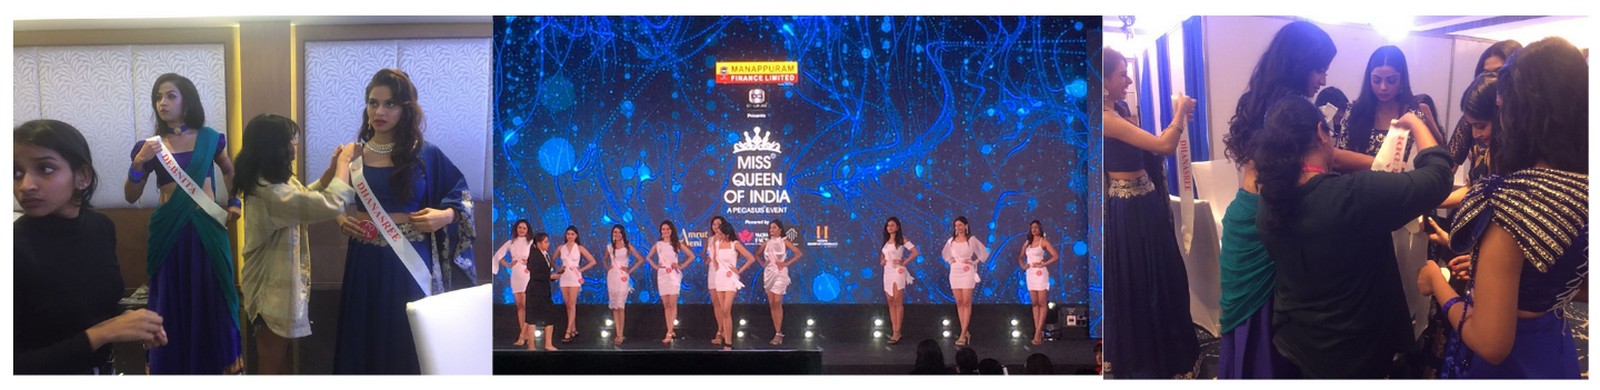 The Manappuram Miss Queen Of India Academy of Design and Managemnt